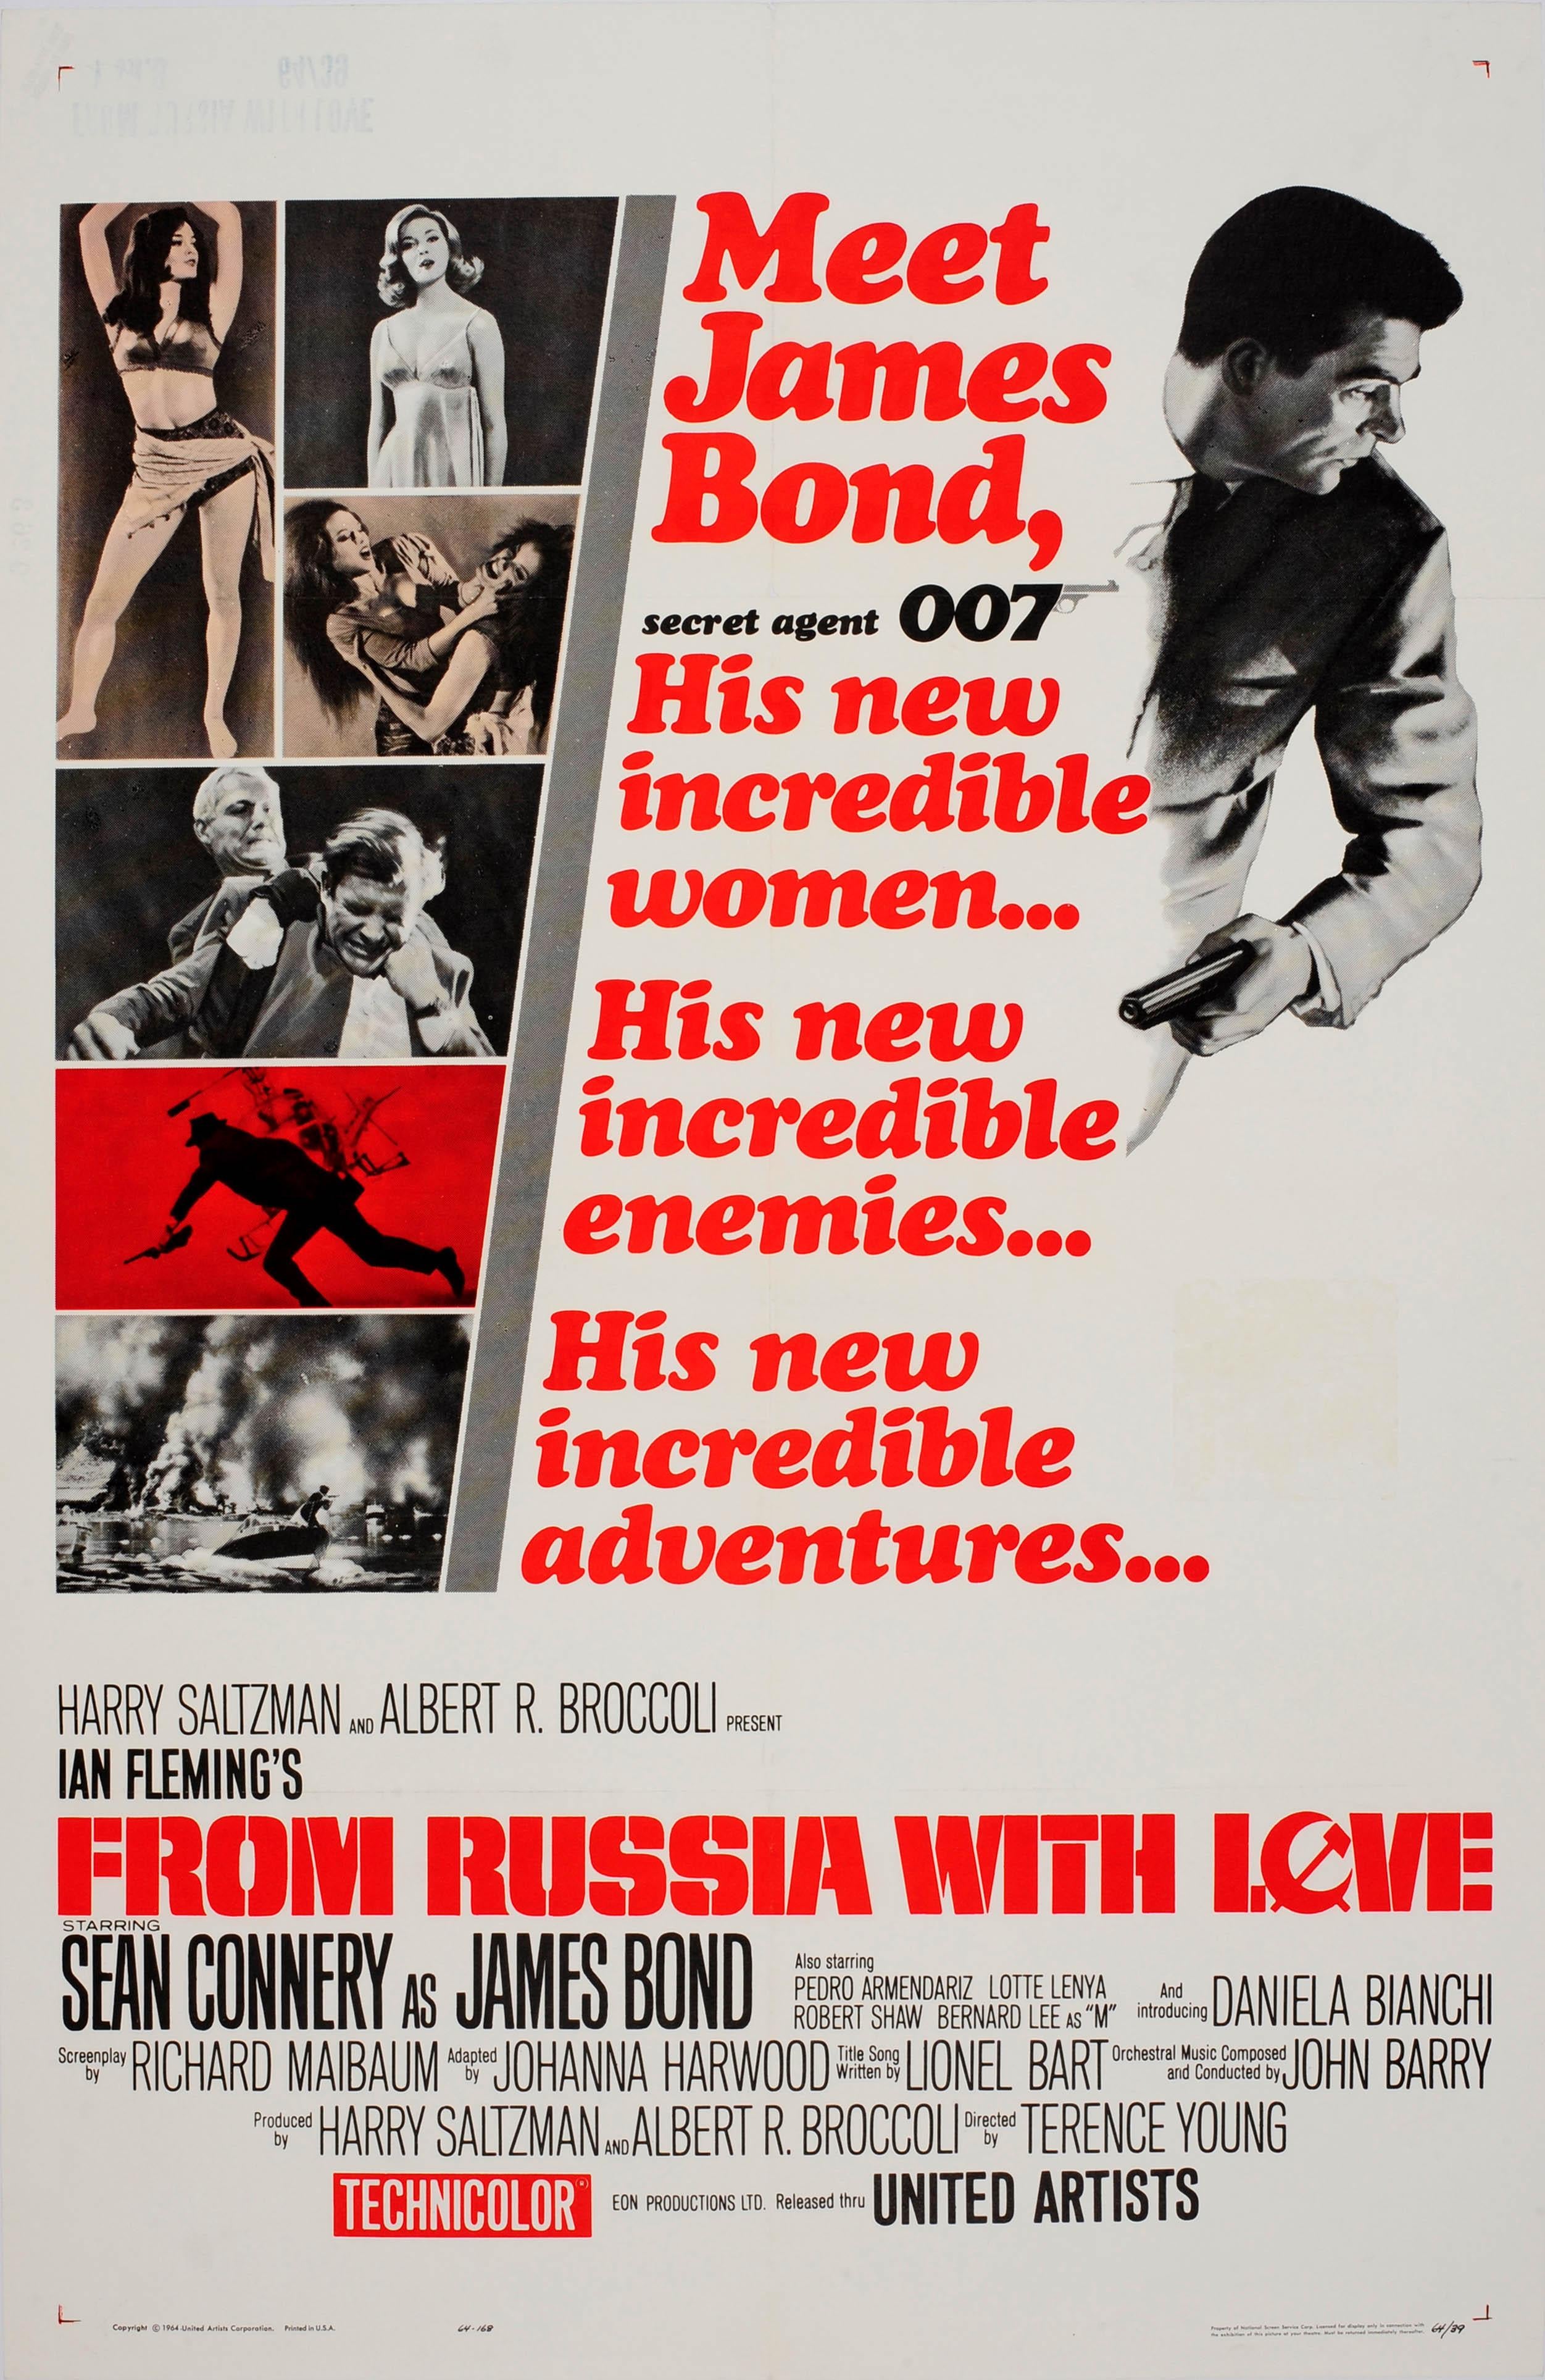 Unknown Print - Original Vintage Movie Poster For The 007 James Bond Film From Russia With Love